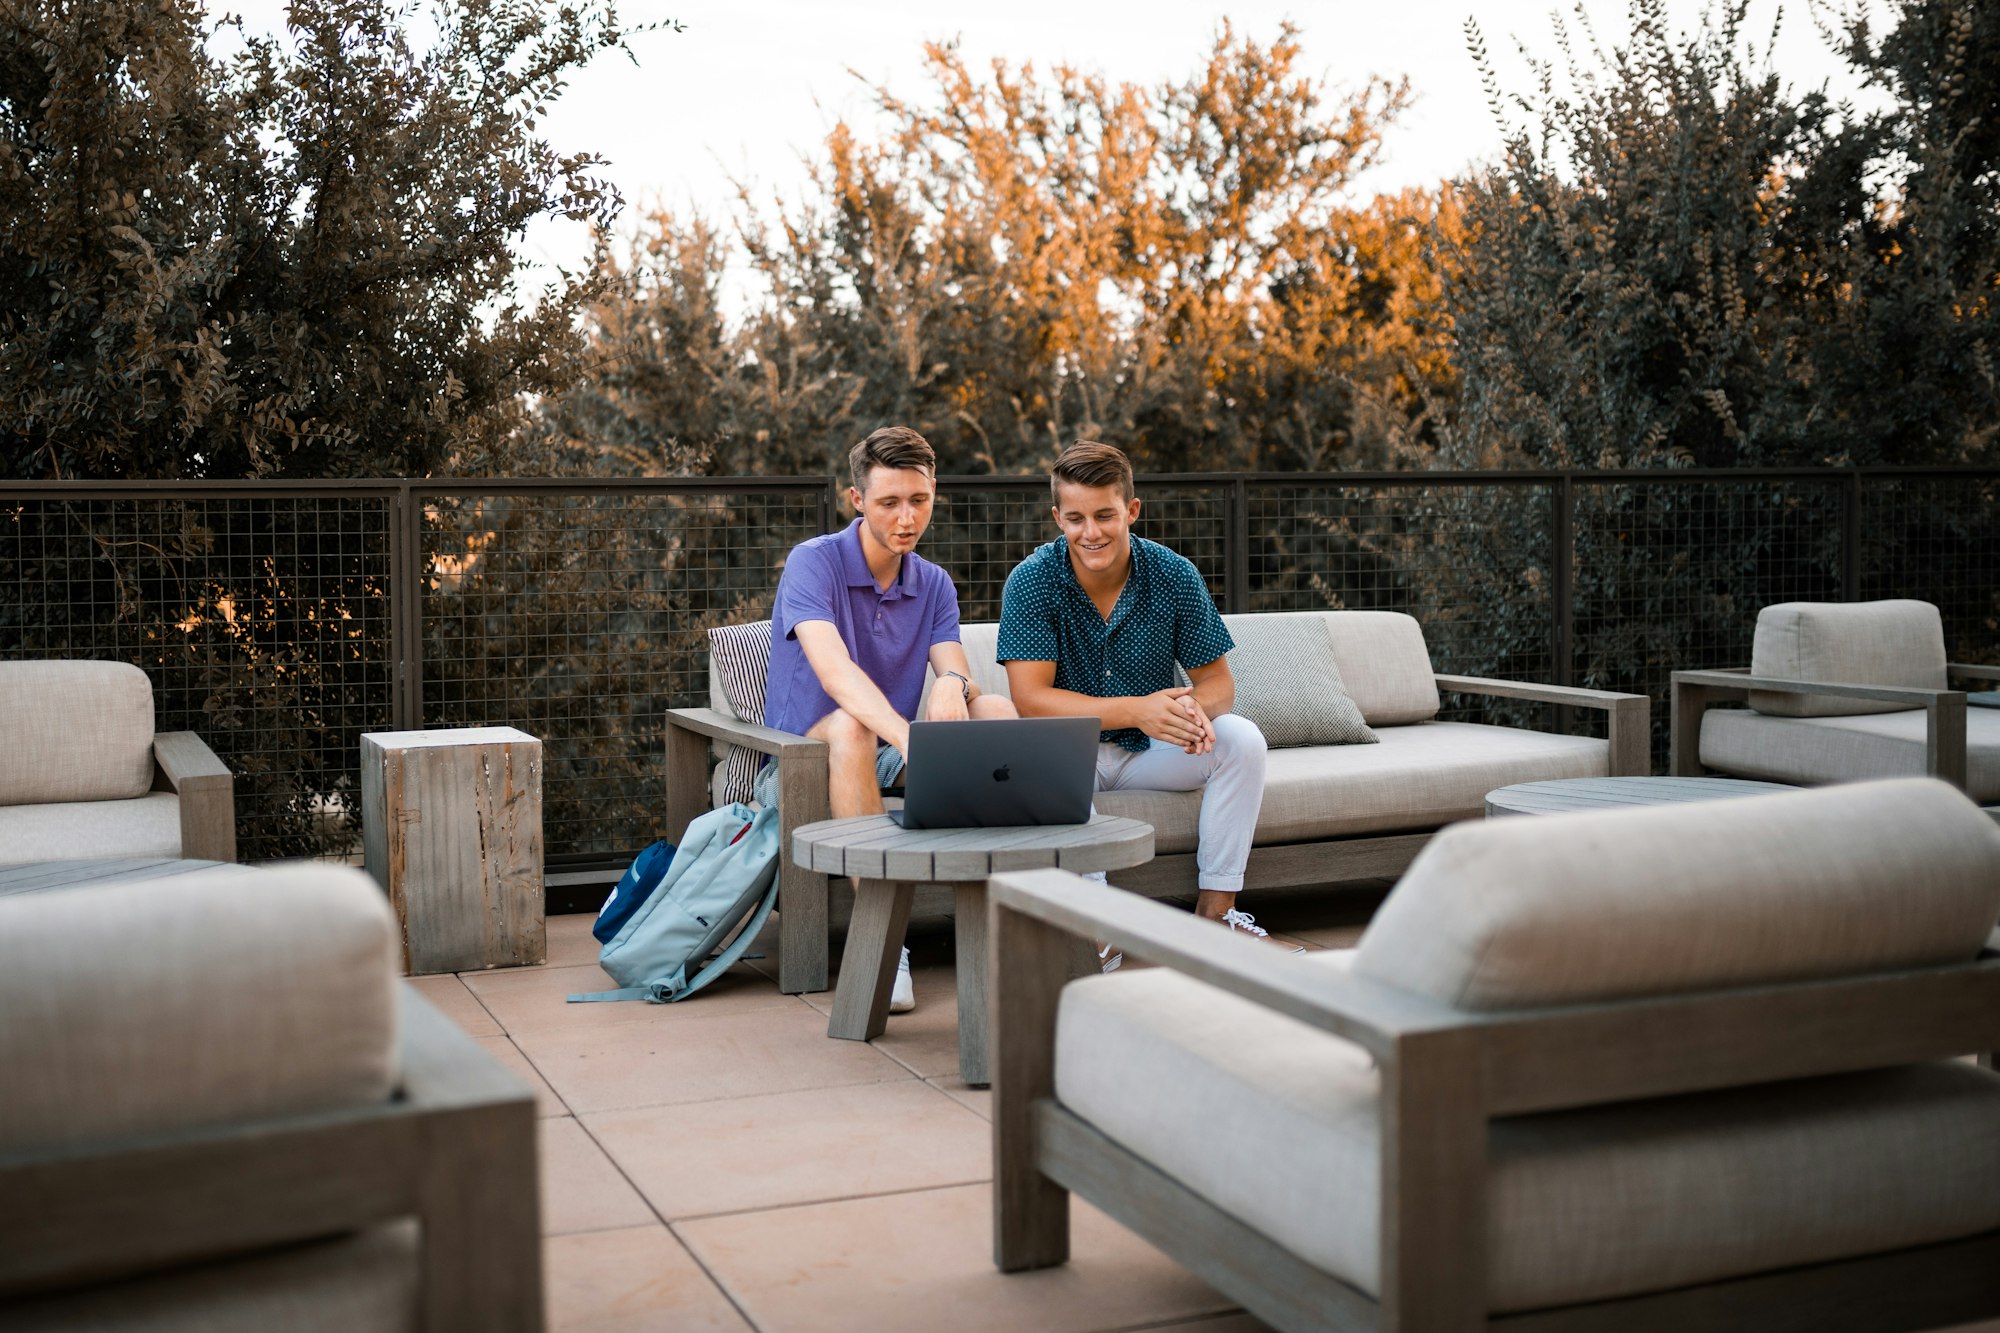 Two males working together on a computer outside.